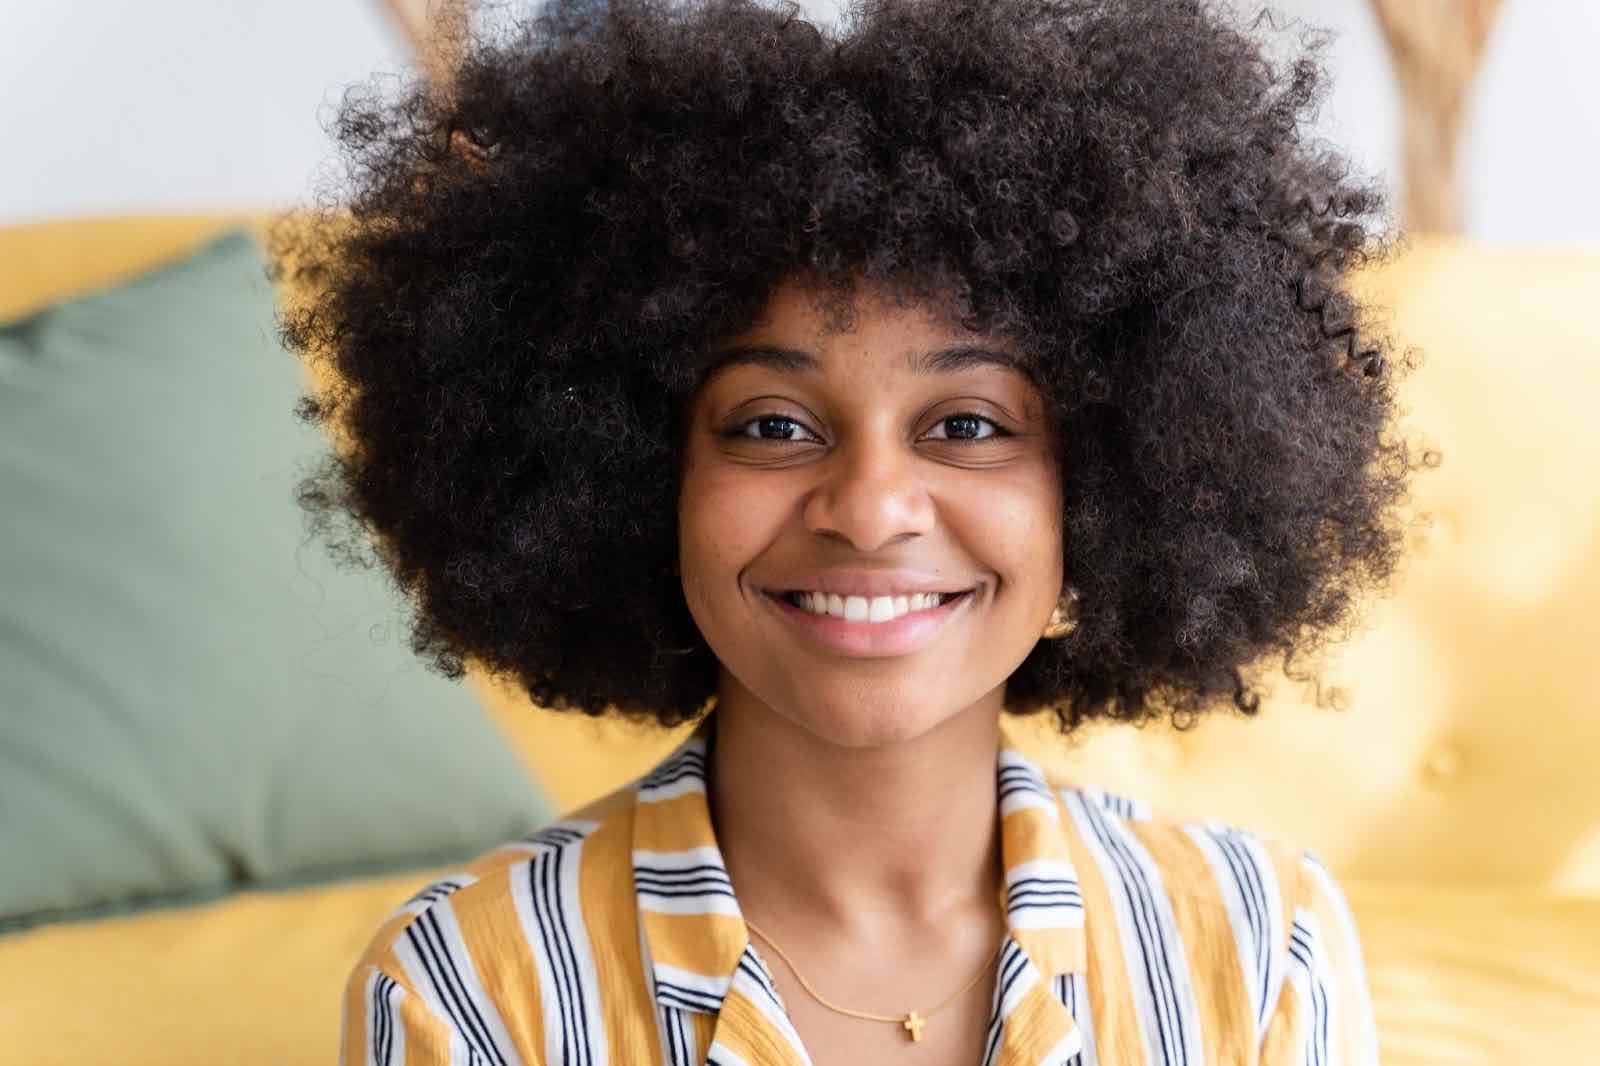 Cheerful black woman with curly hair looking confidently into the camera about her life choices.